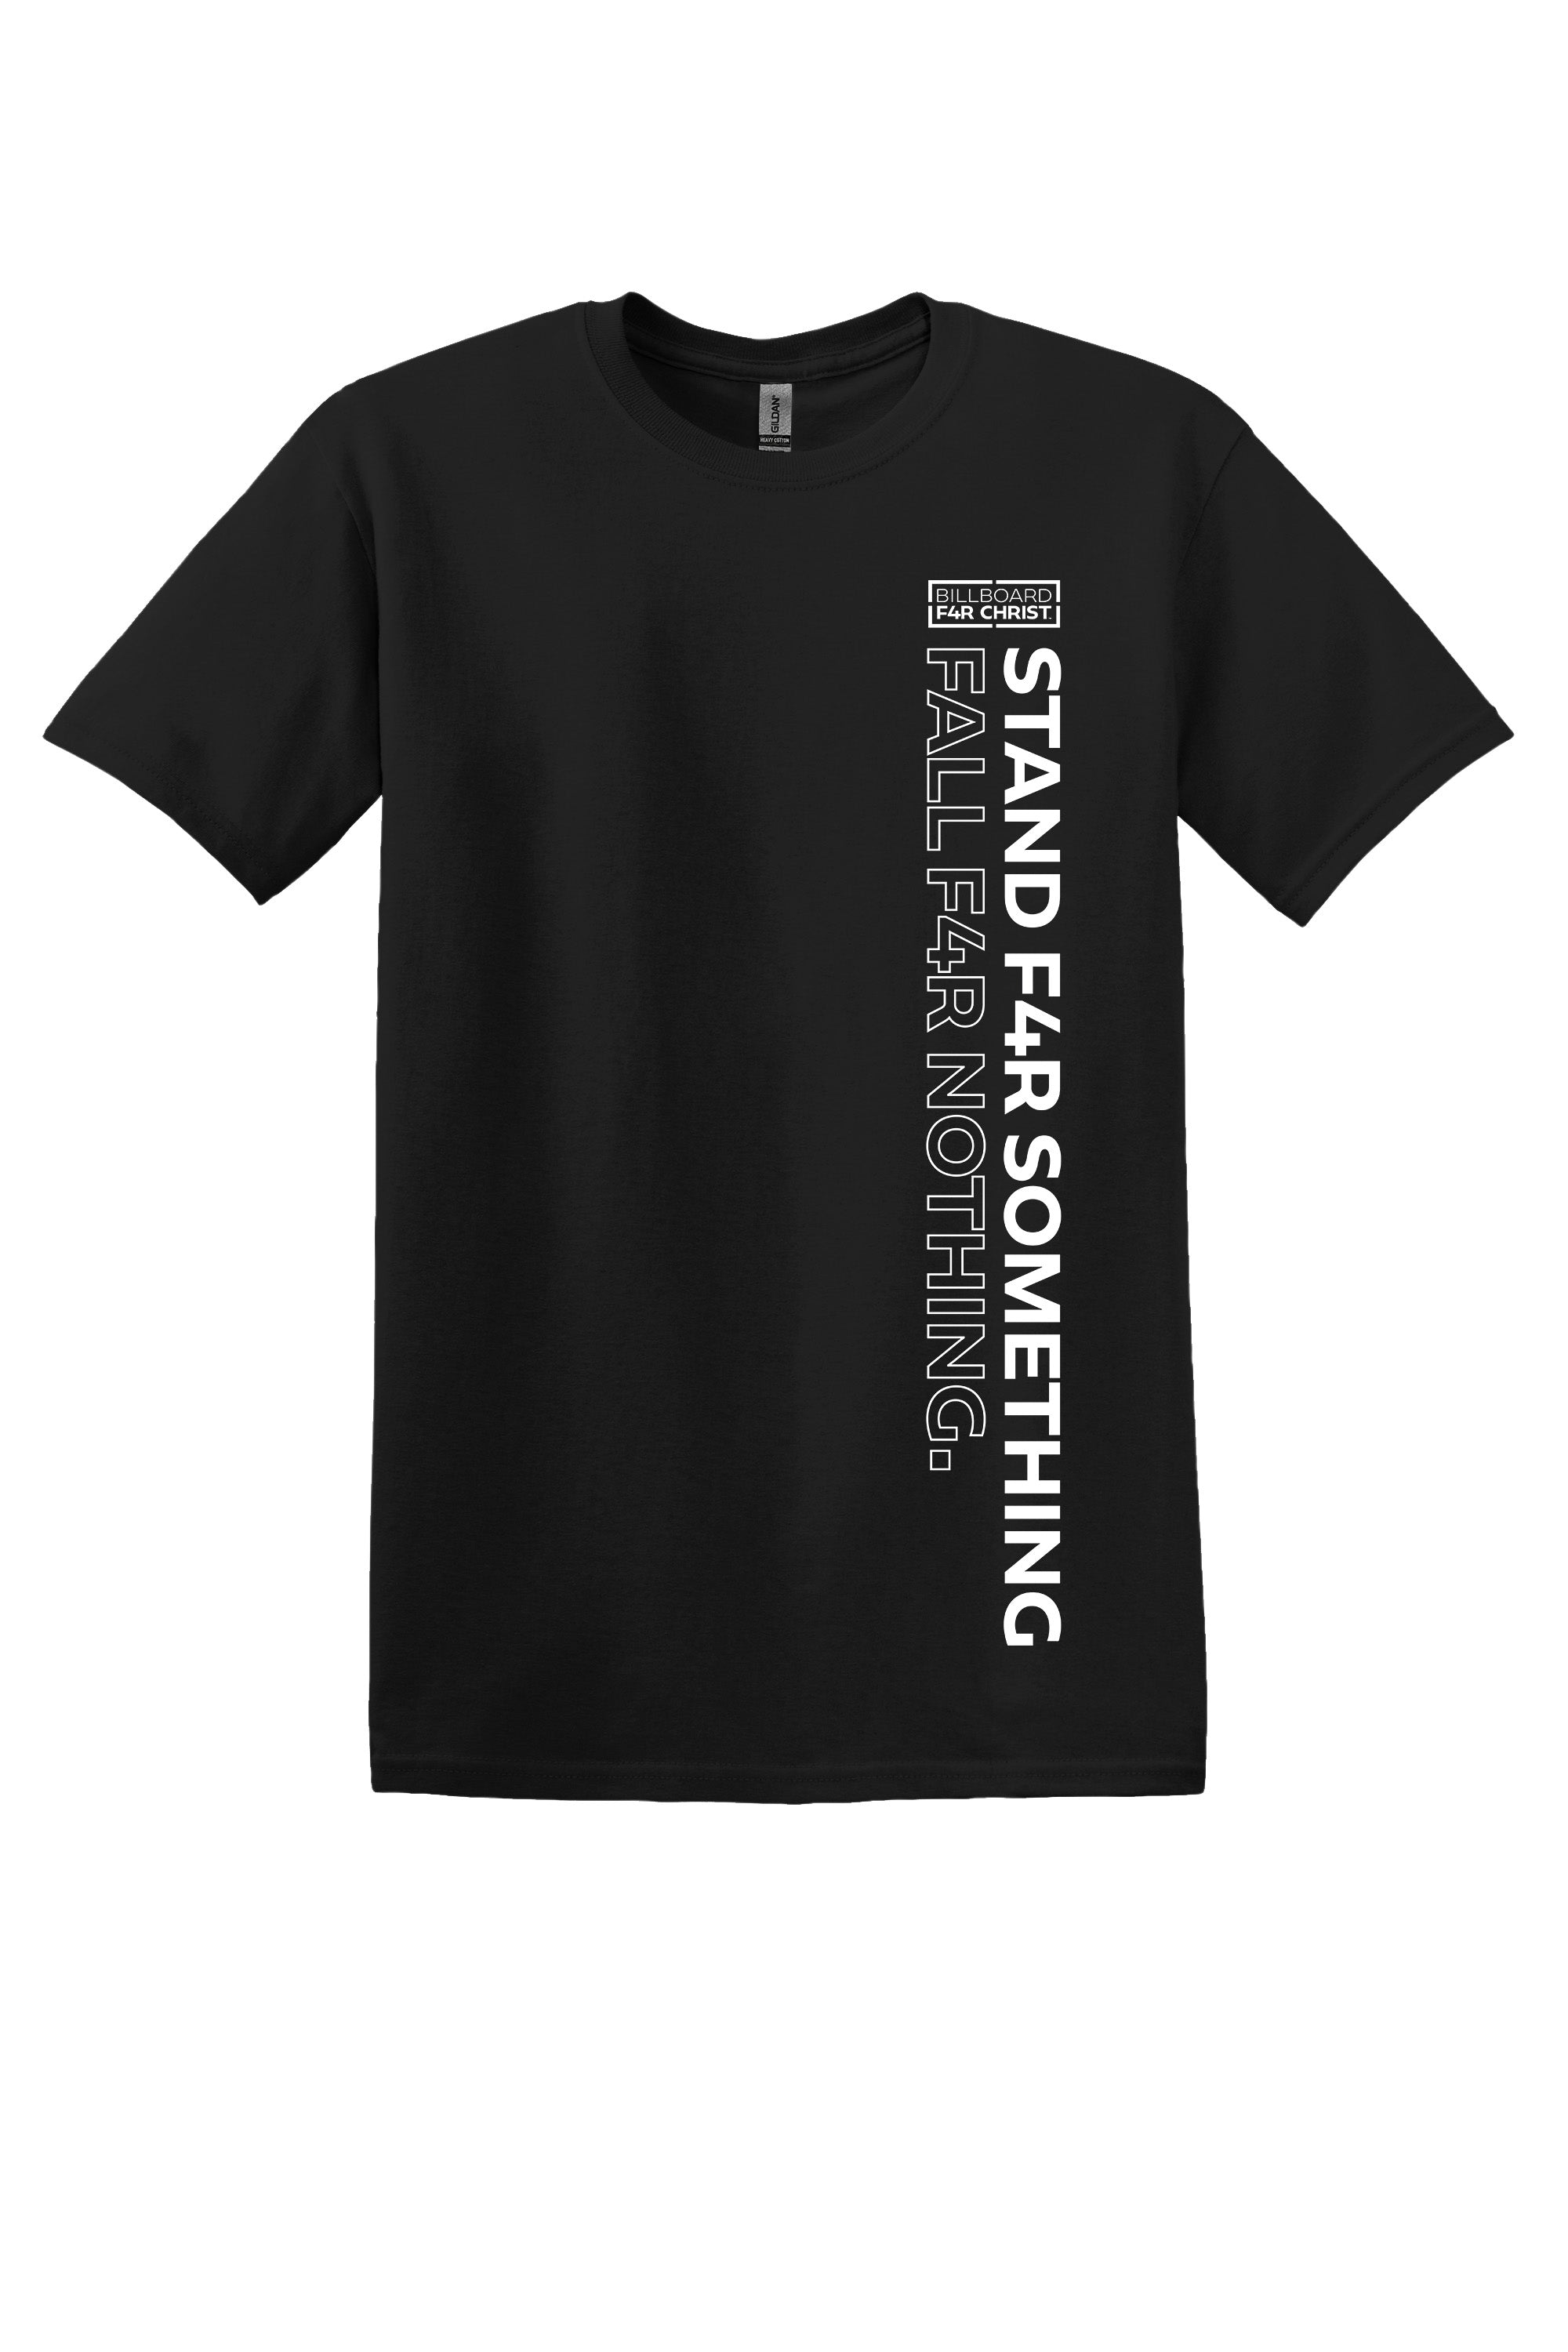 Stand F4R Something Men's Durable T-Shirt